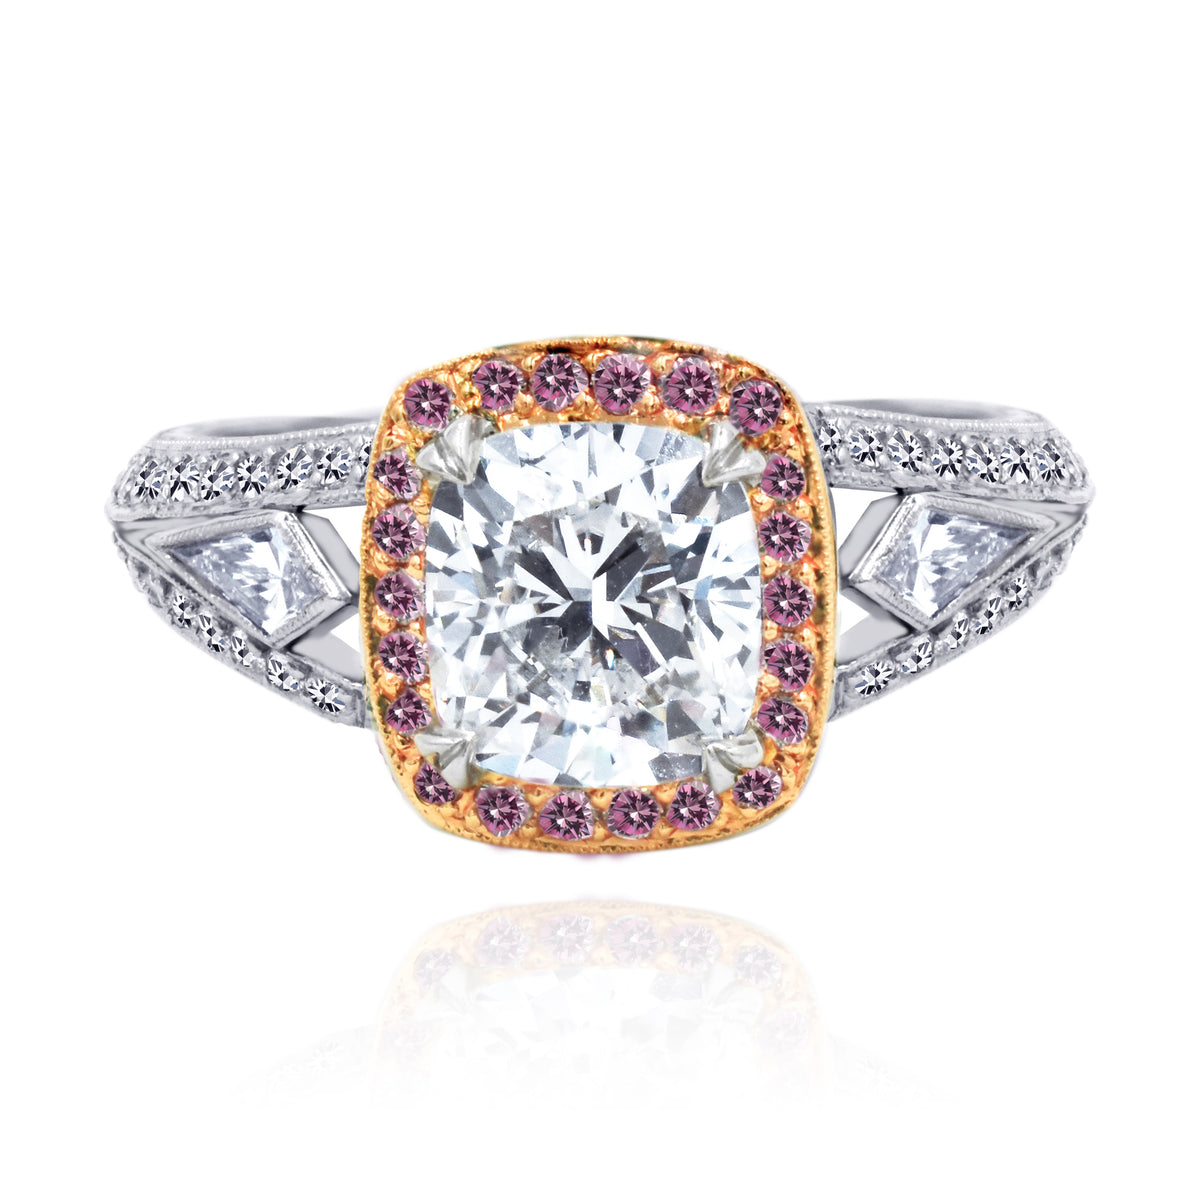 Beaudry Platinum and 18K Rose Gold Cushion Cut Diamond Ring